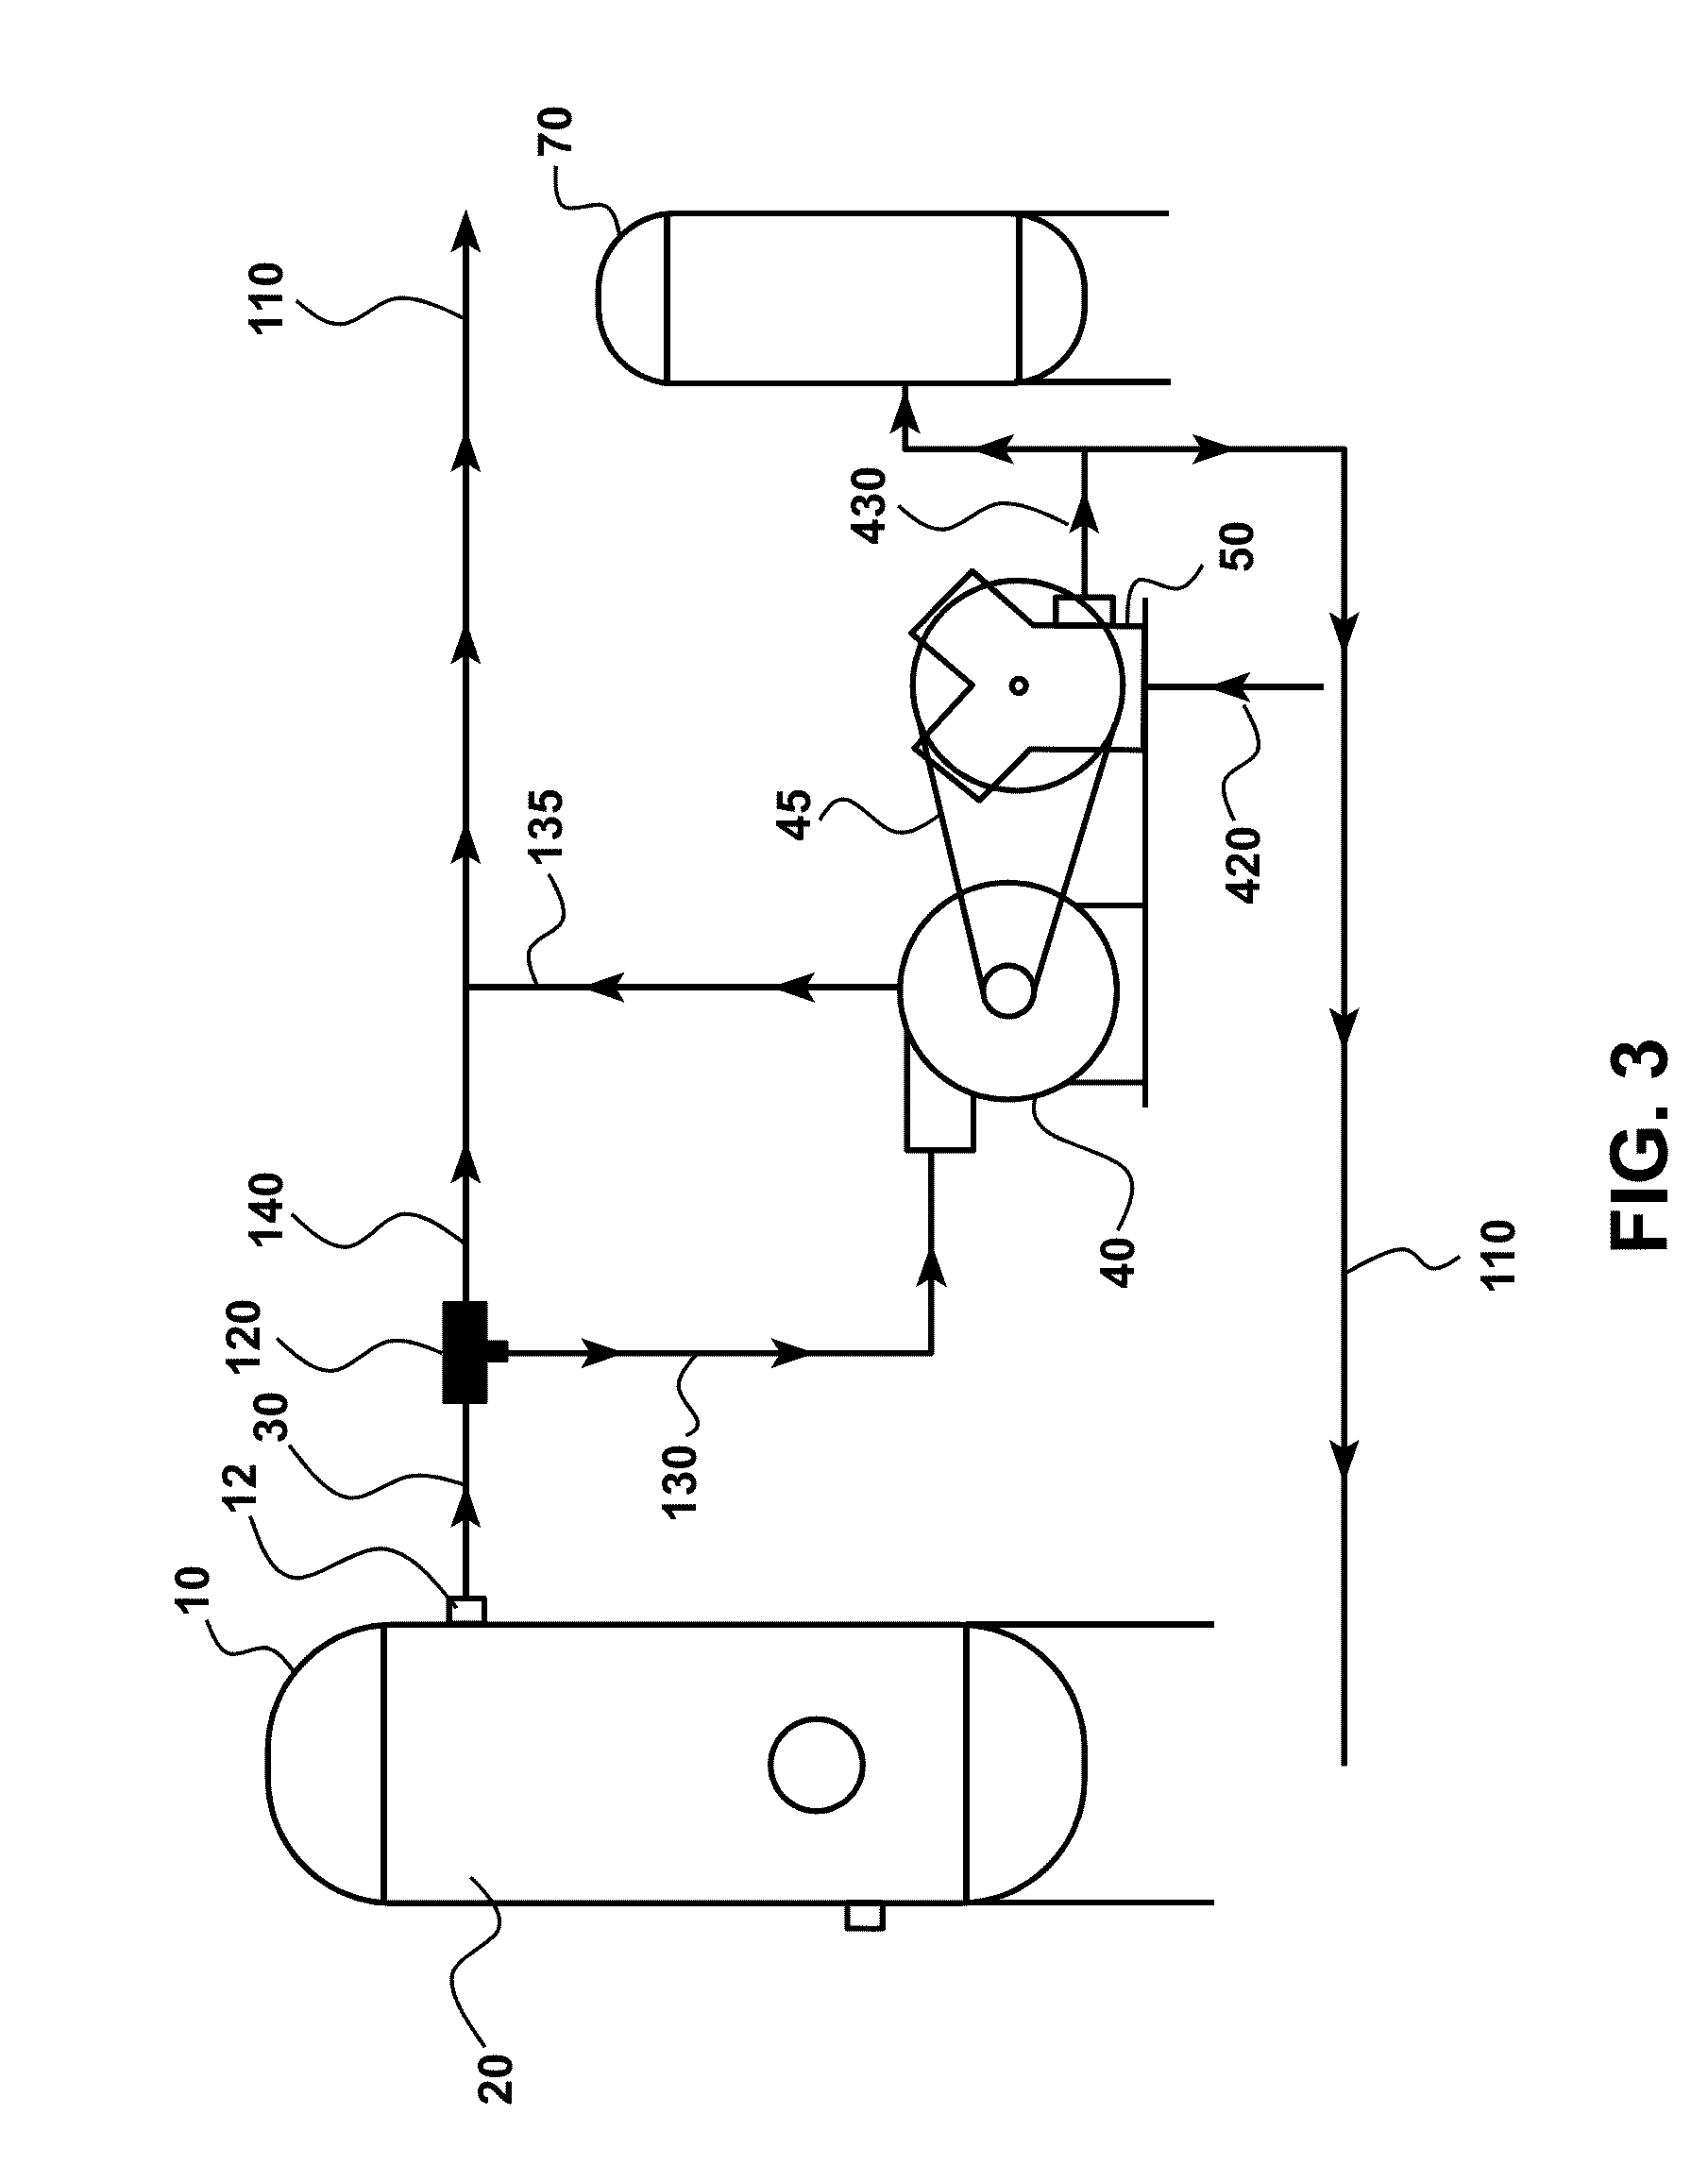 Boundary layer disk turbine systems for hydrocarbon recovery